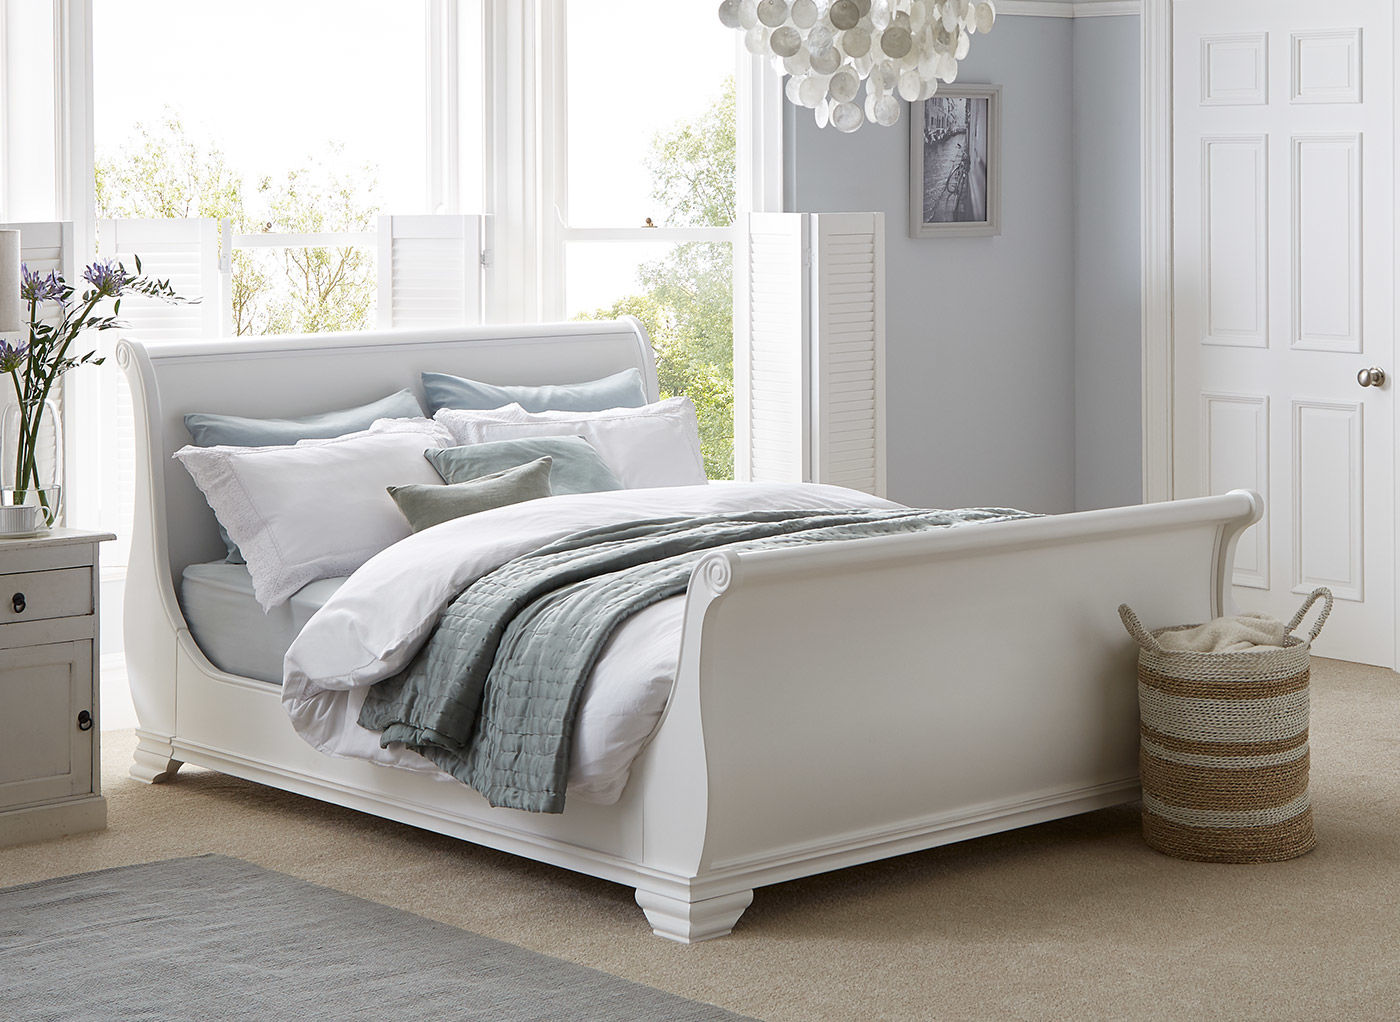 white beds orleans white wooden bed frame | dreams MEITKCU